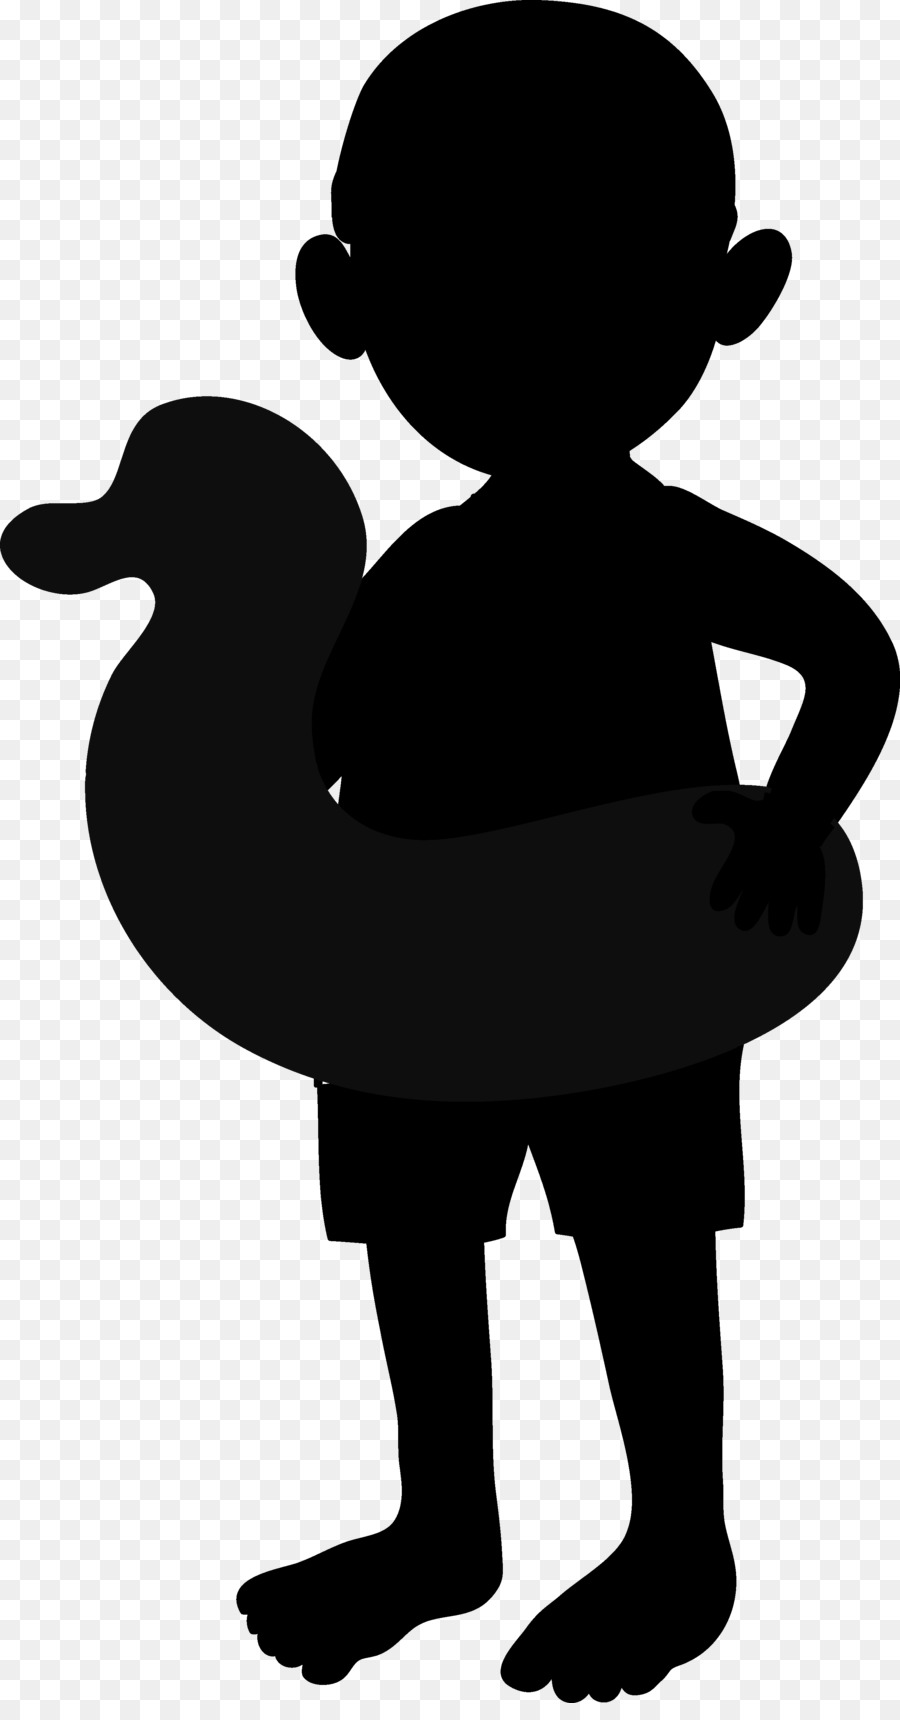 Silhouette Detective Person - Silhouette png download - 2690*5089 - Free Transparent Silhouette png Download.